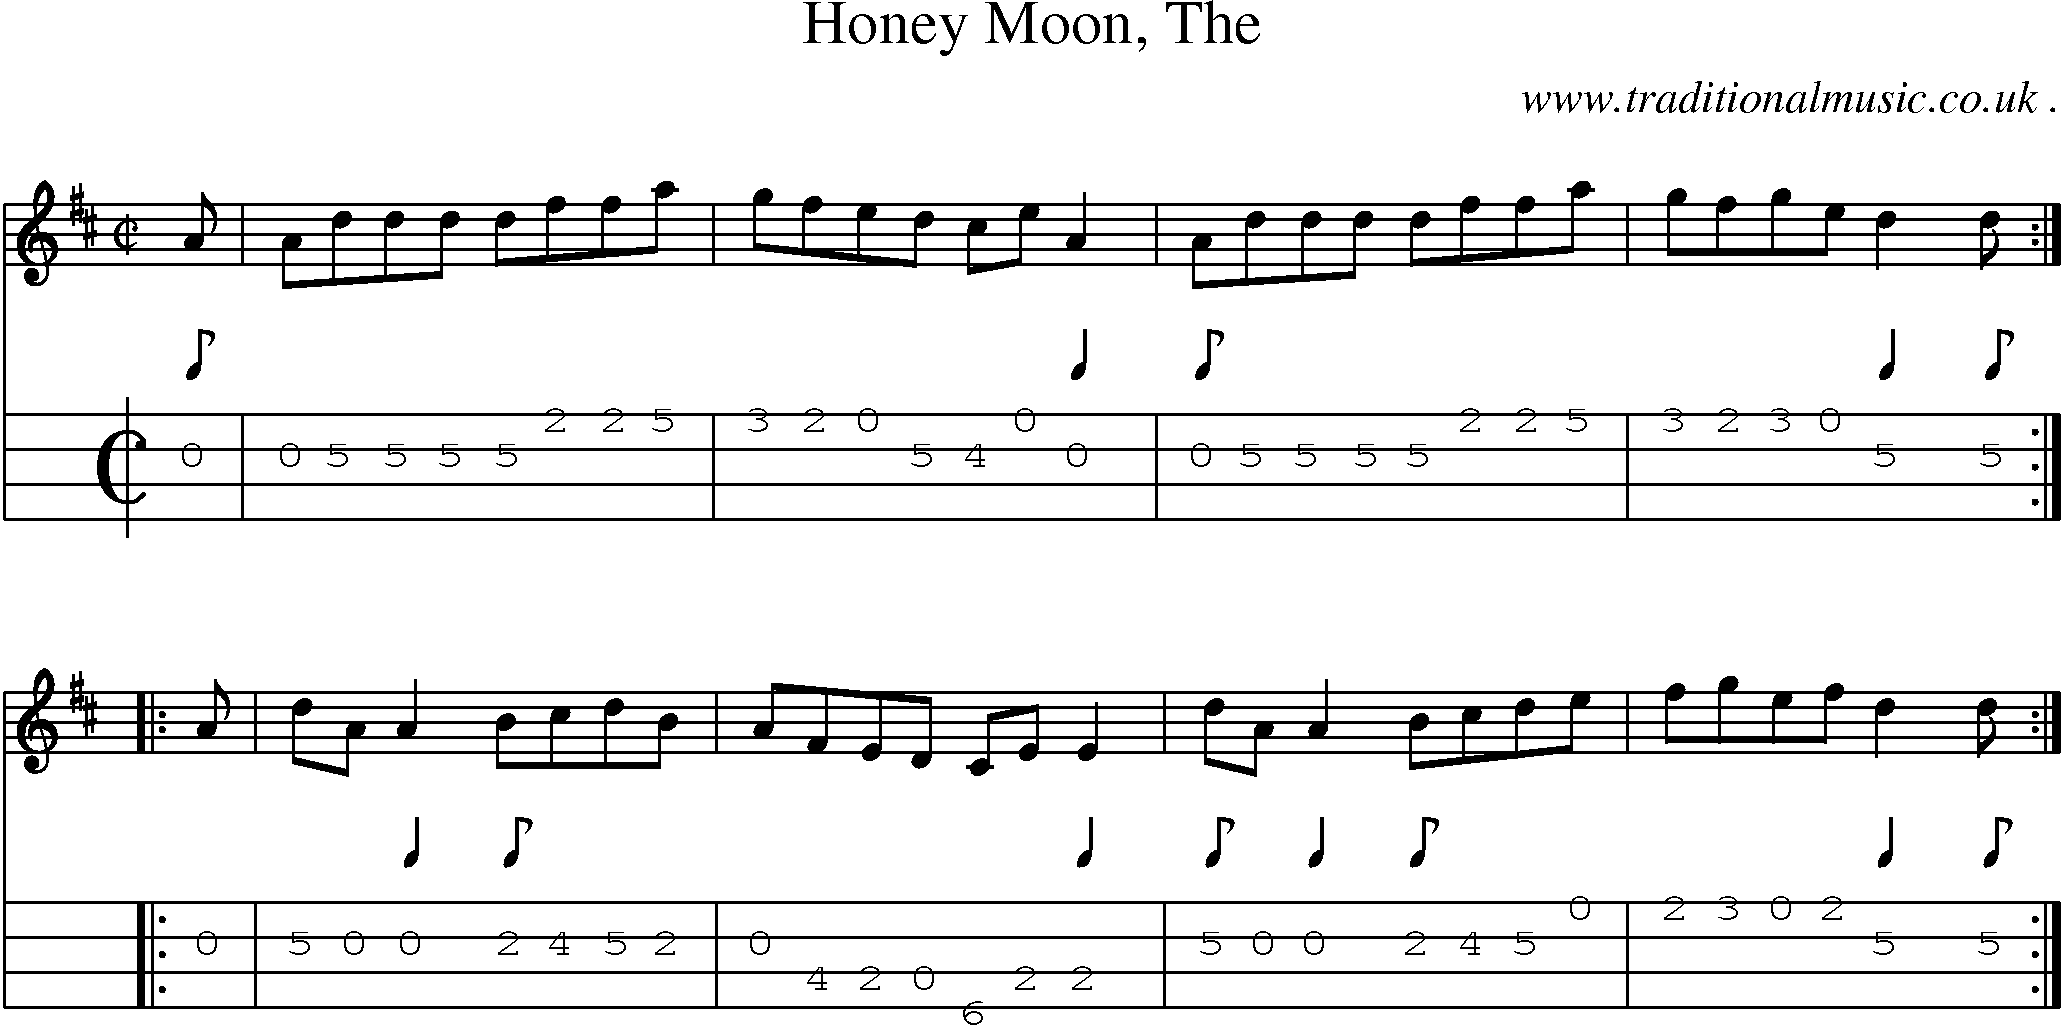 Sheet-music  score, Chords and Mandolin Tabs for Honey Moon The